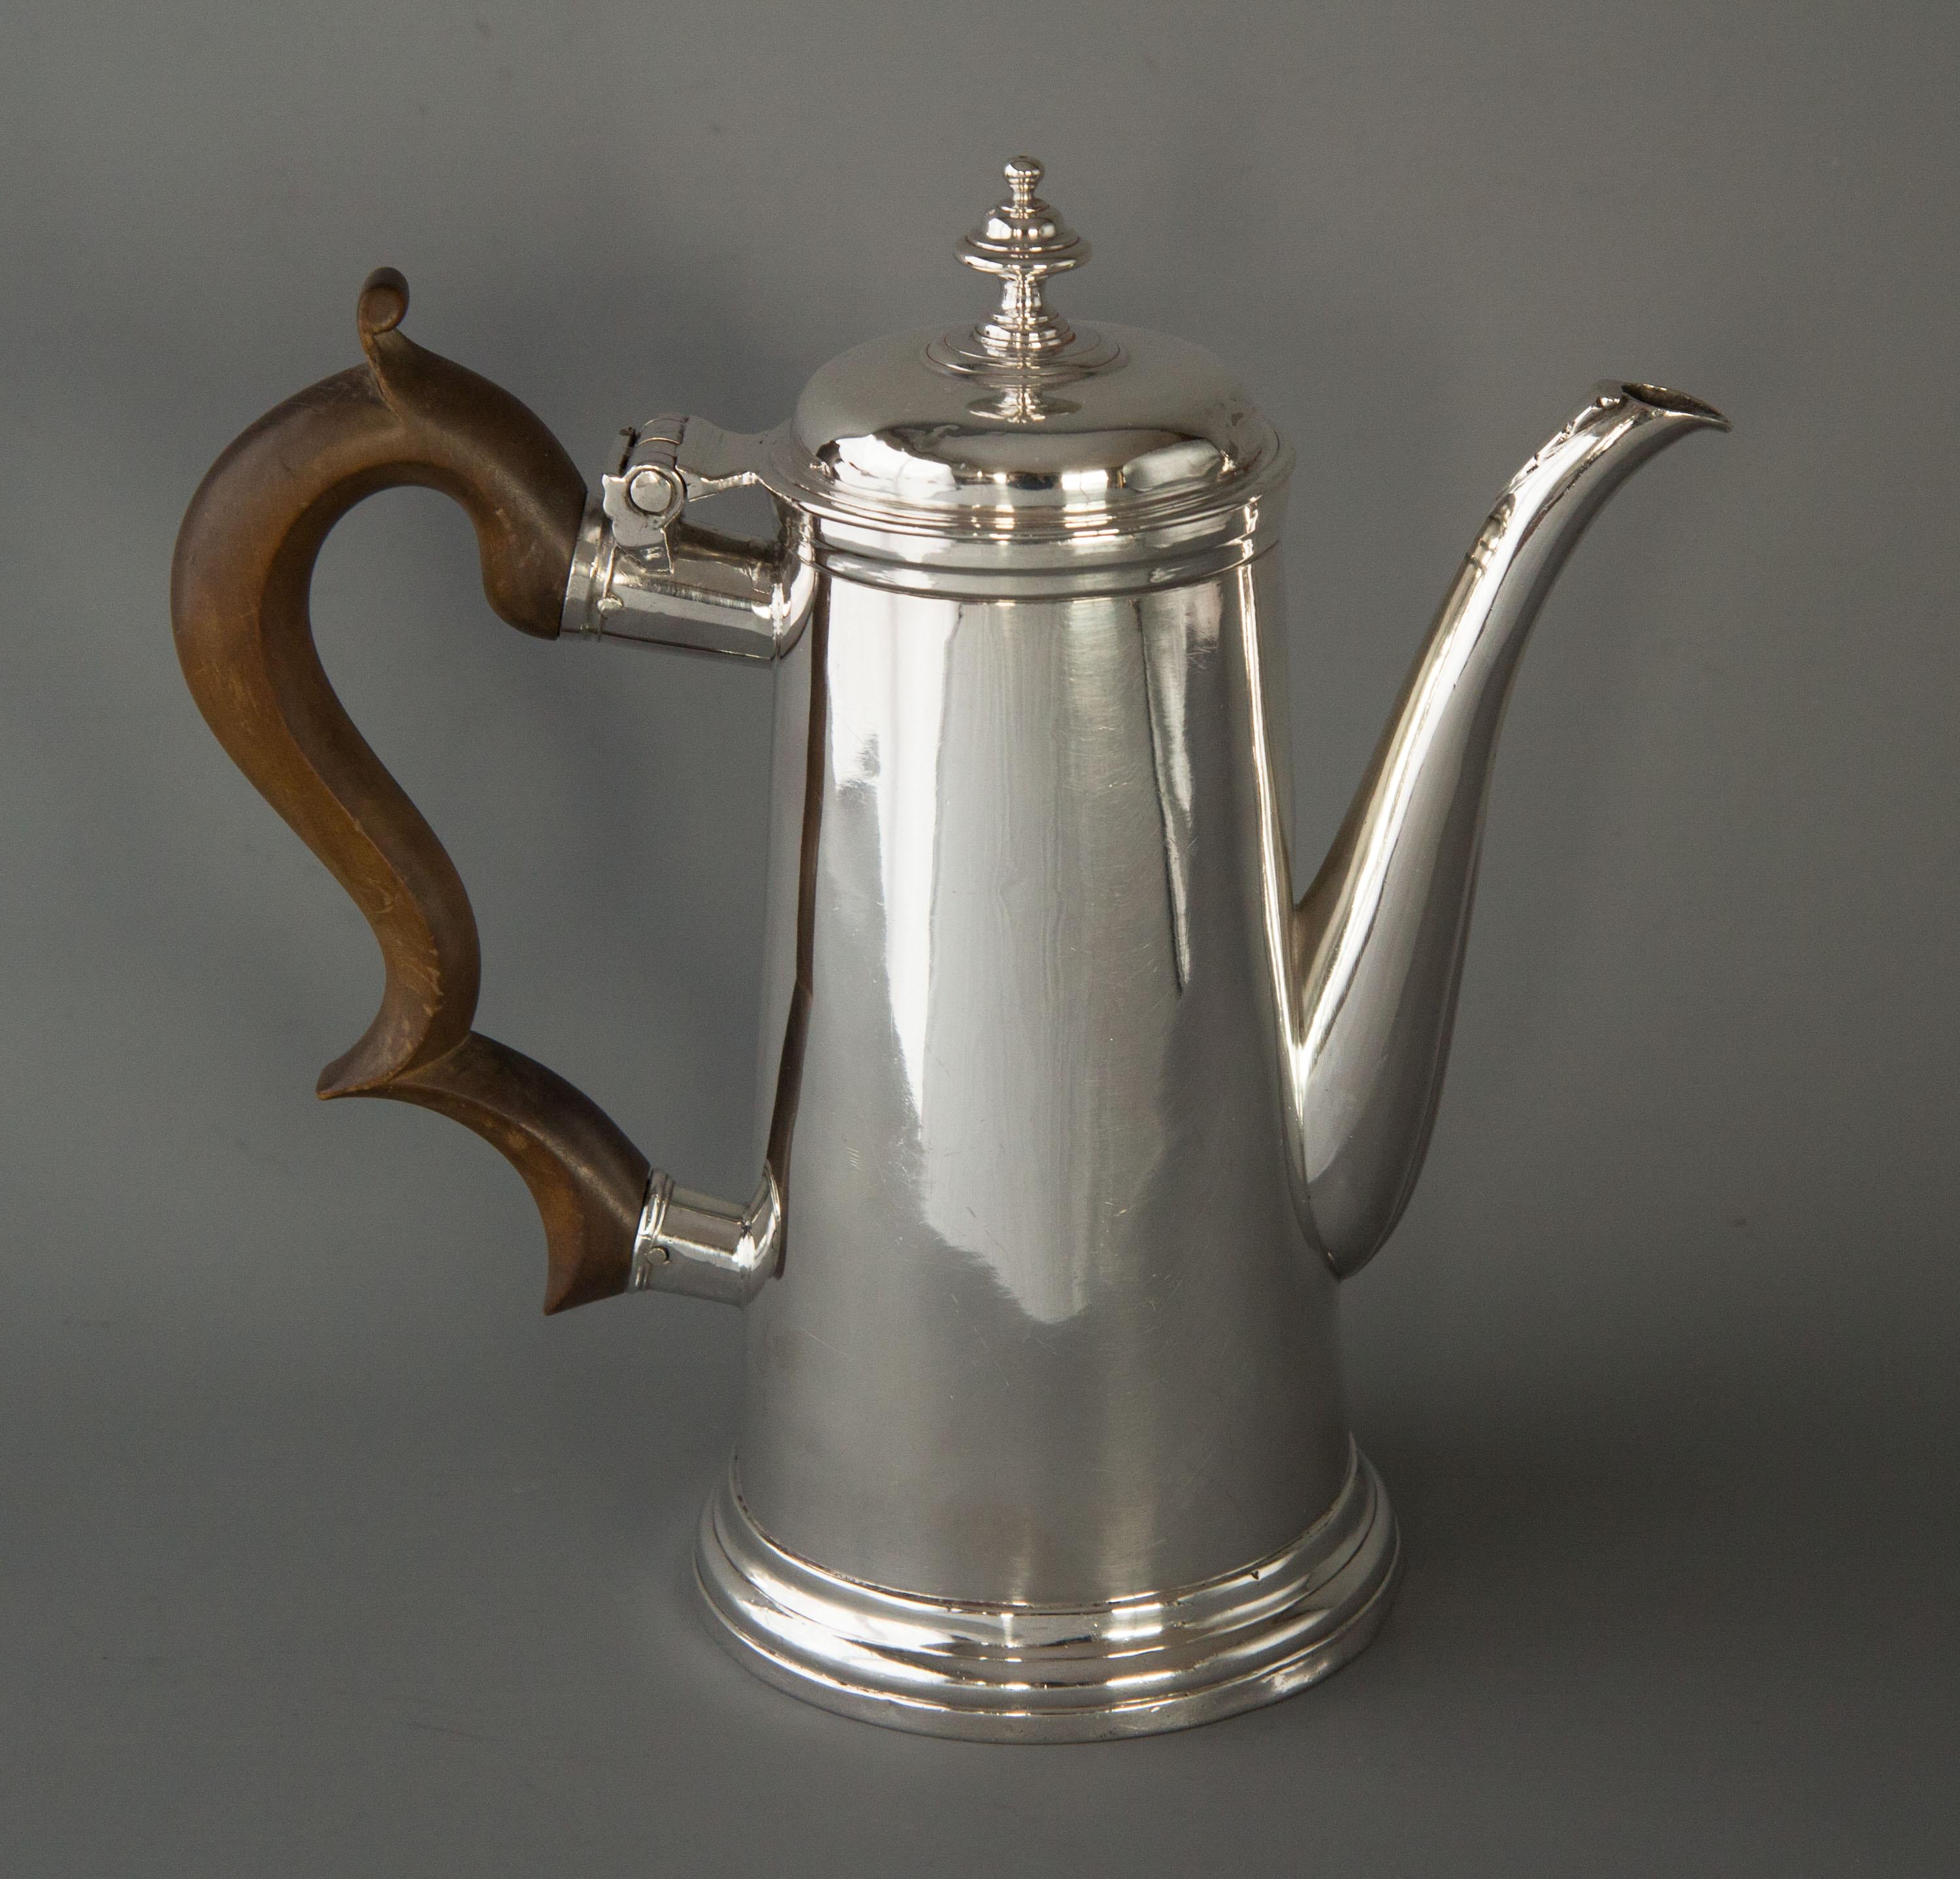 A very rare and excellent quality Irish Queen Anne silver coffee pot of plain tapering cylindrical form, leaf-capped spout, low domed well fitting lid with cast finial. Original scroll fruit wood handle. The whole standing on a stepped circular